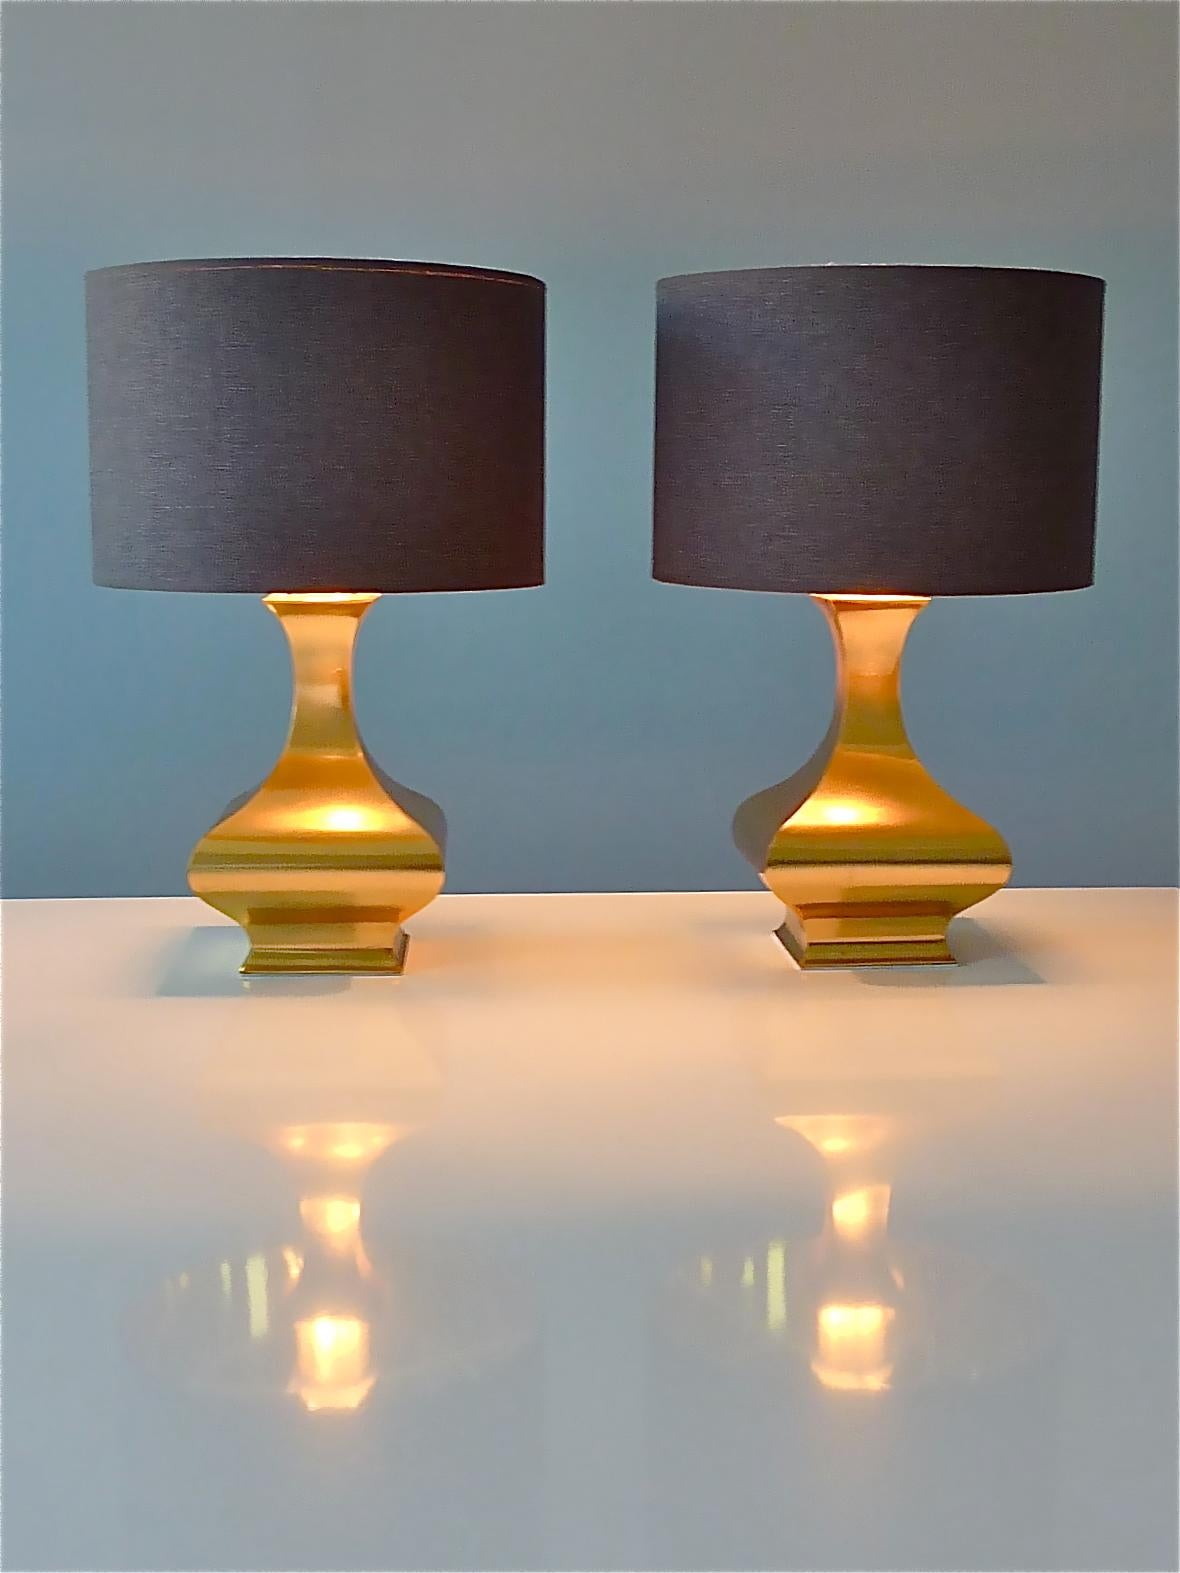 Amazing rare pair of gilt brass stainless steel metal table lamps designed by Maria Pergay, France around 1970s. Each table lamp has one plastic fitting and takes one E27 standard screw bulb to illuminate. Wiring and switch are very good so all is